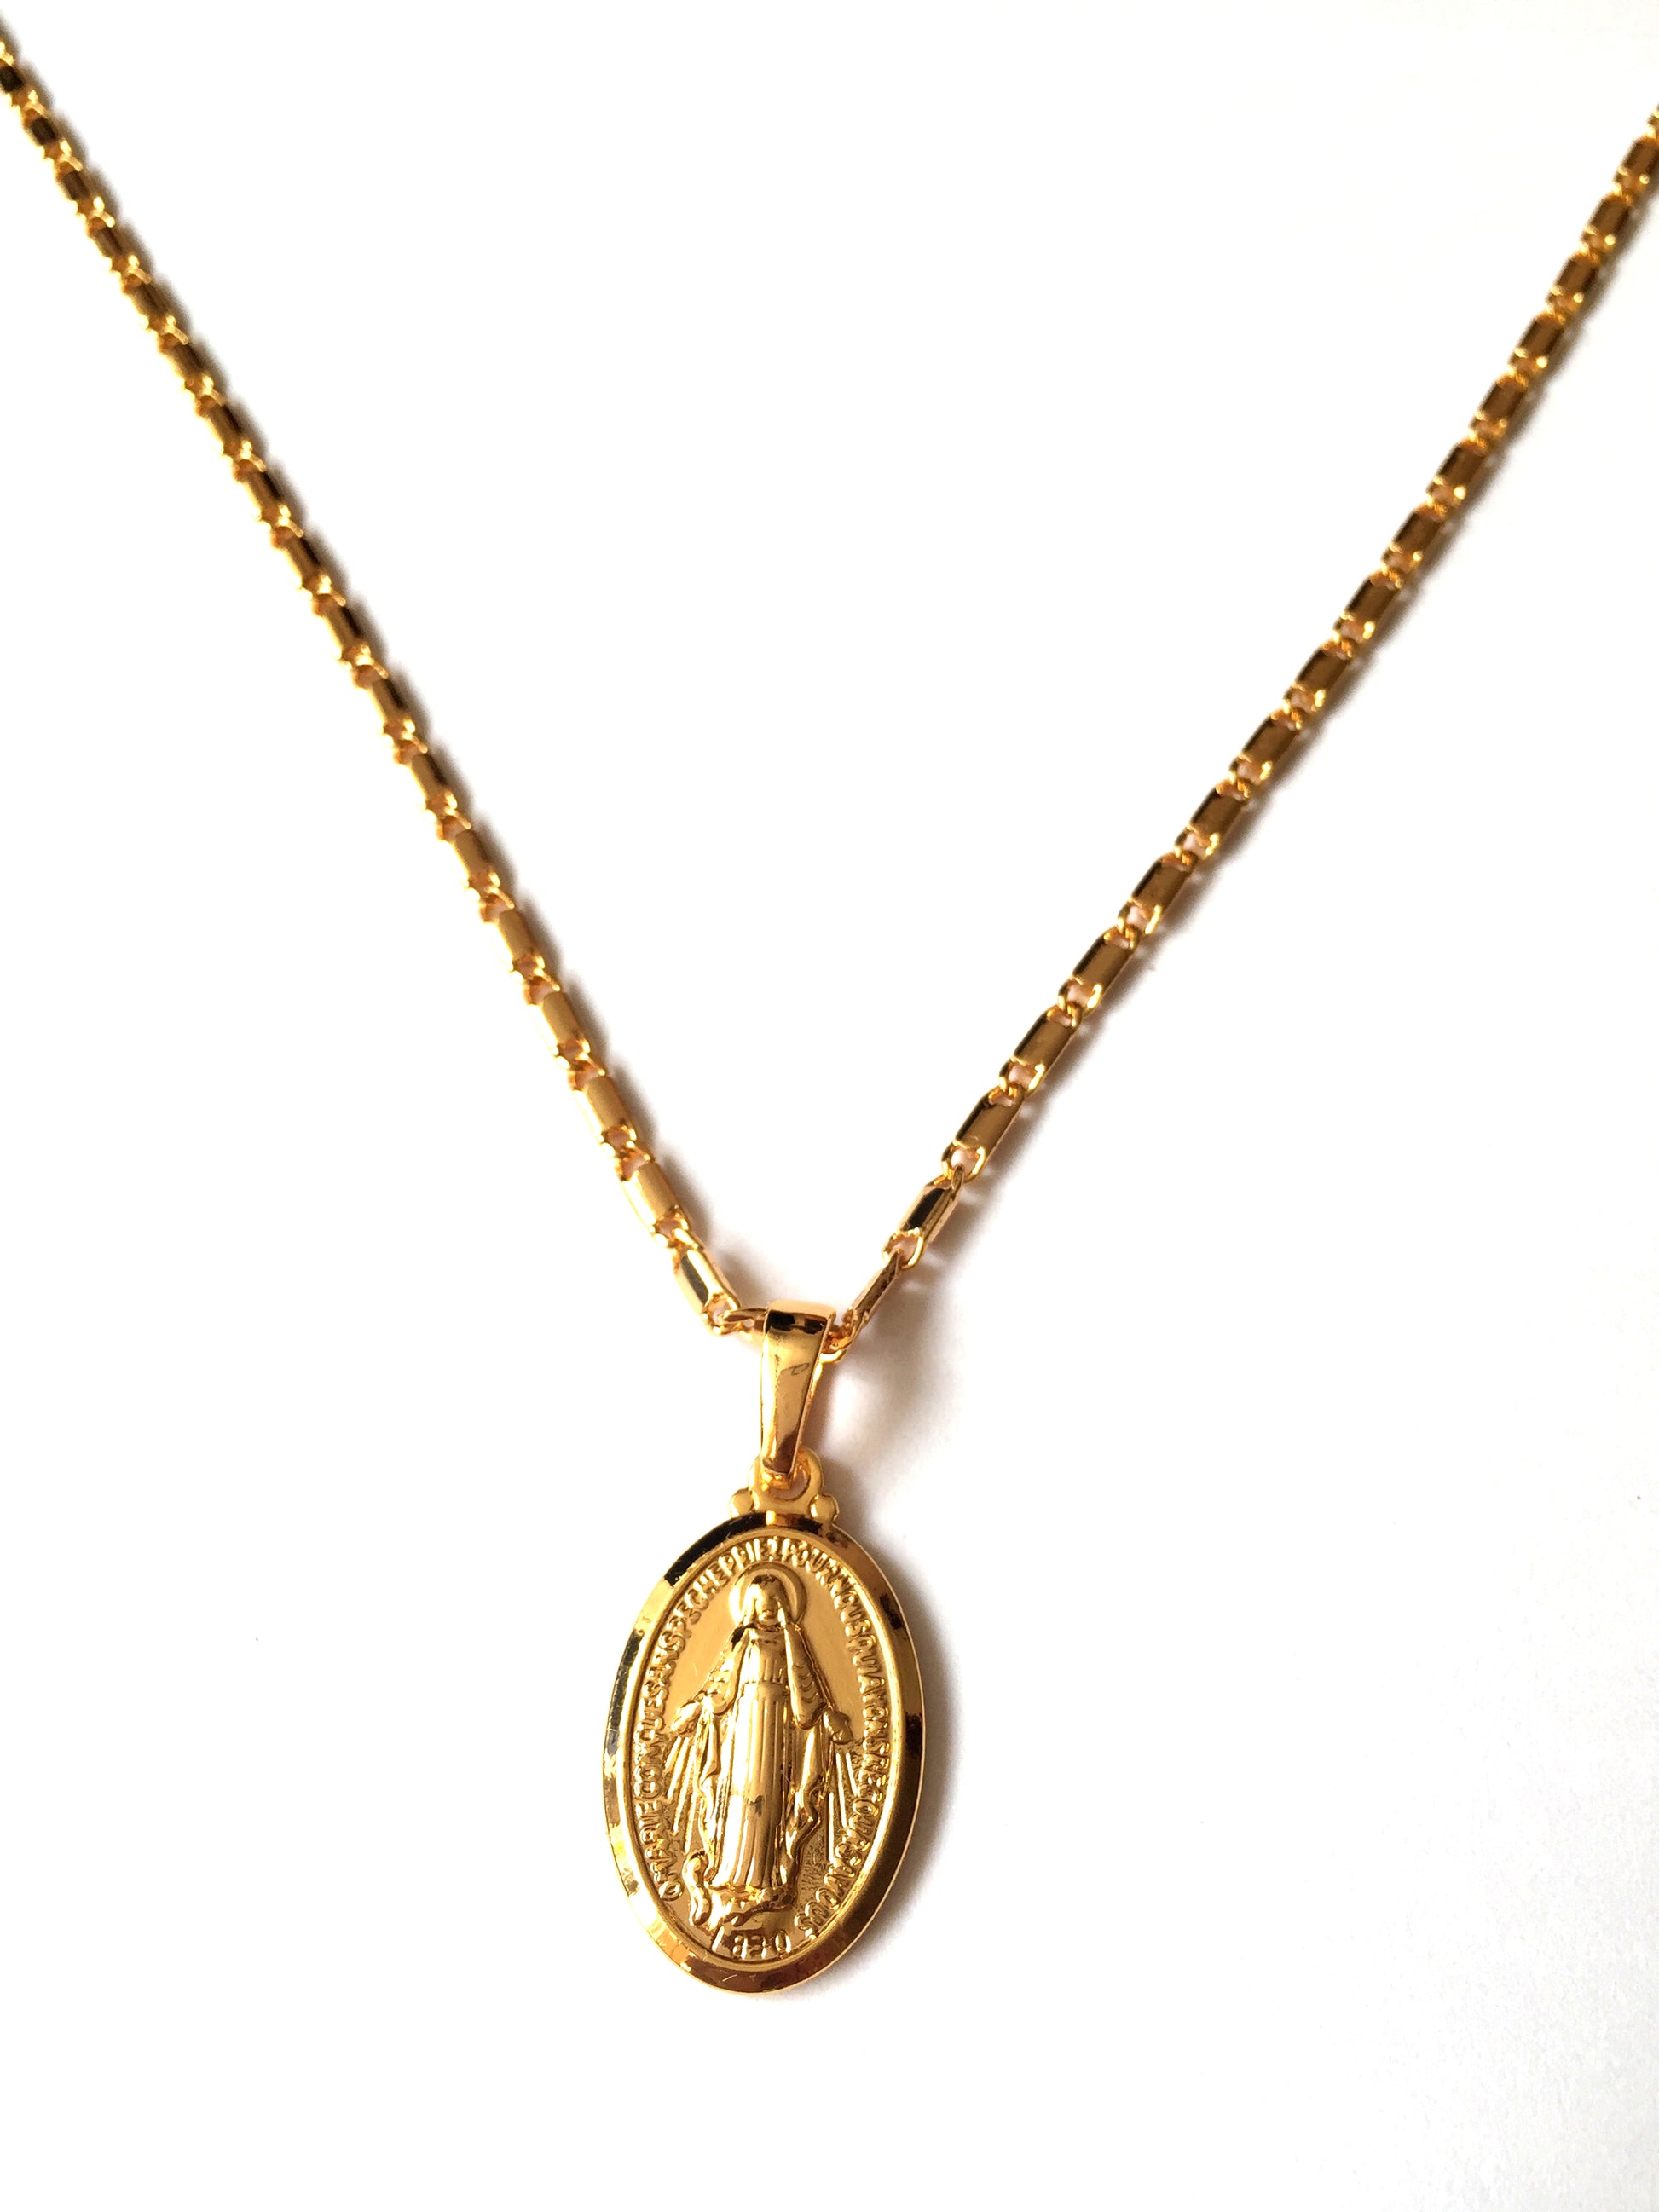 Gold Miraculous Medal Necklace, A beautiful high quality necklace with a miraculous medal pendant of the Immaculate Virgin Mary, Would make a beautiful holy gift for Communion, Baptism, Christening, Easter, Christmas or other special occasion